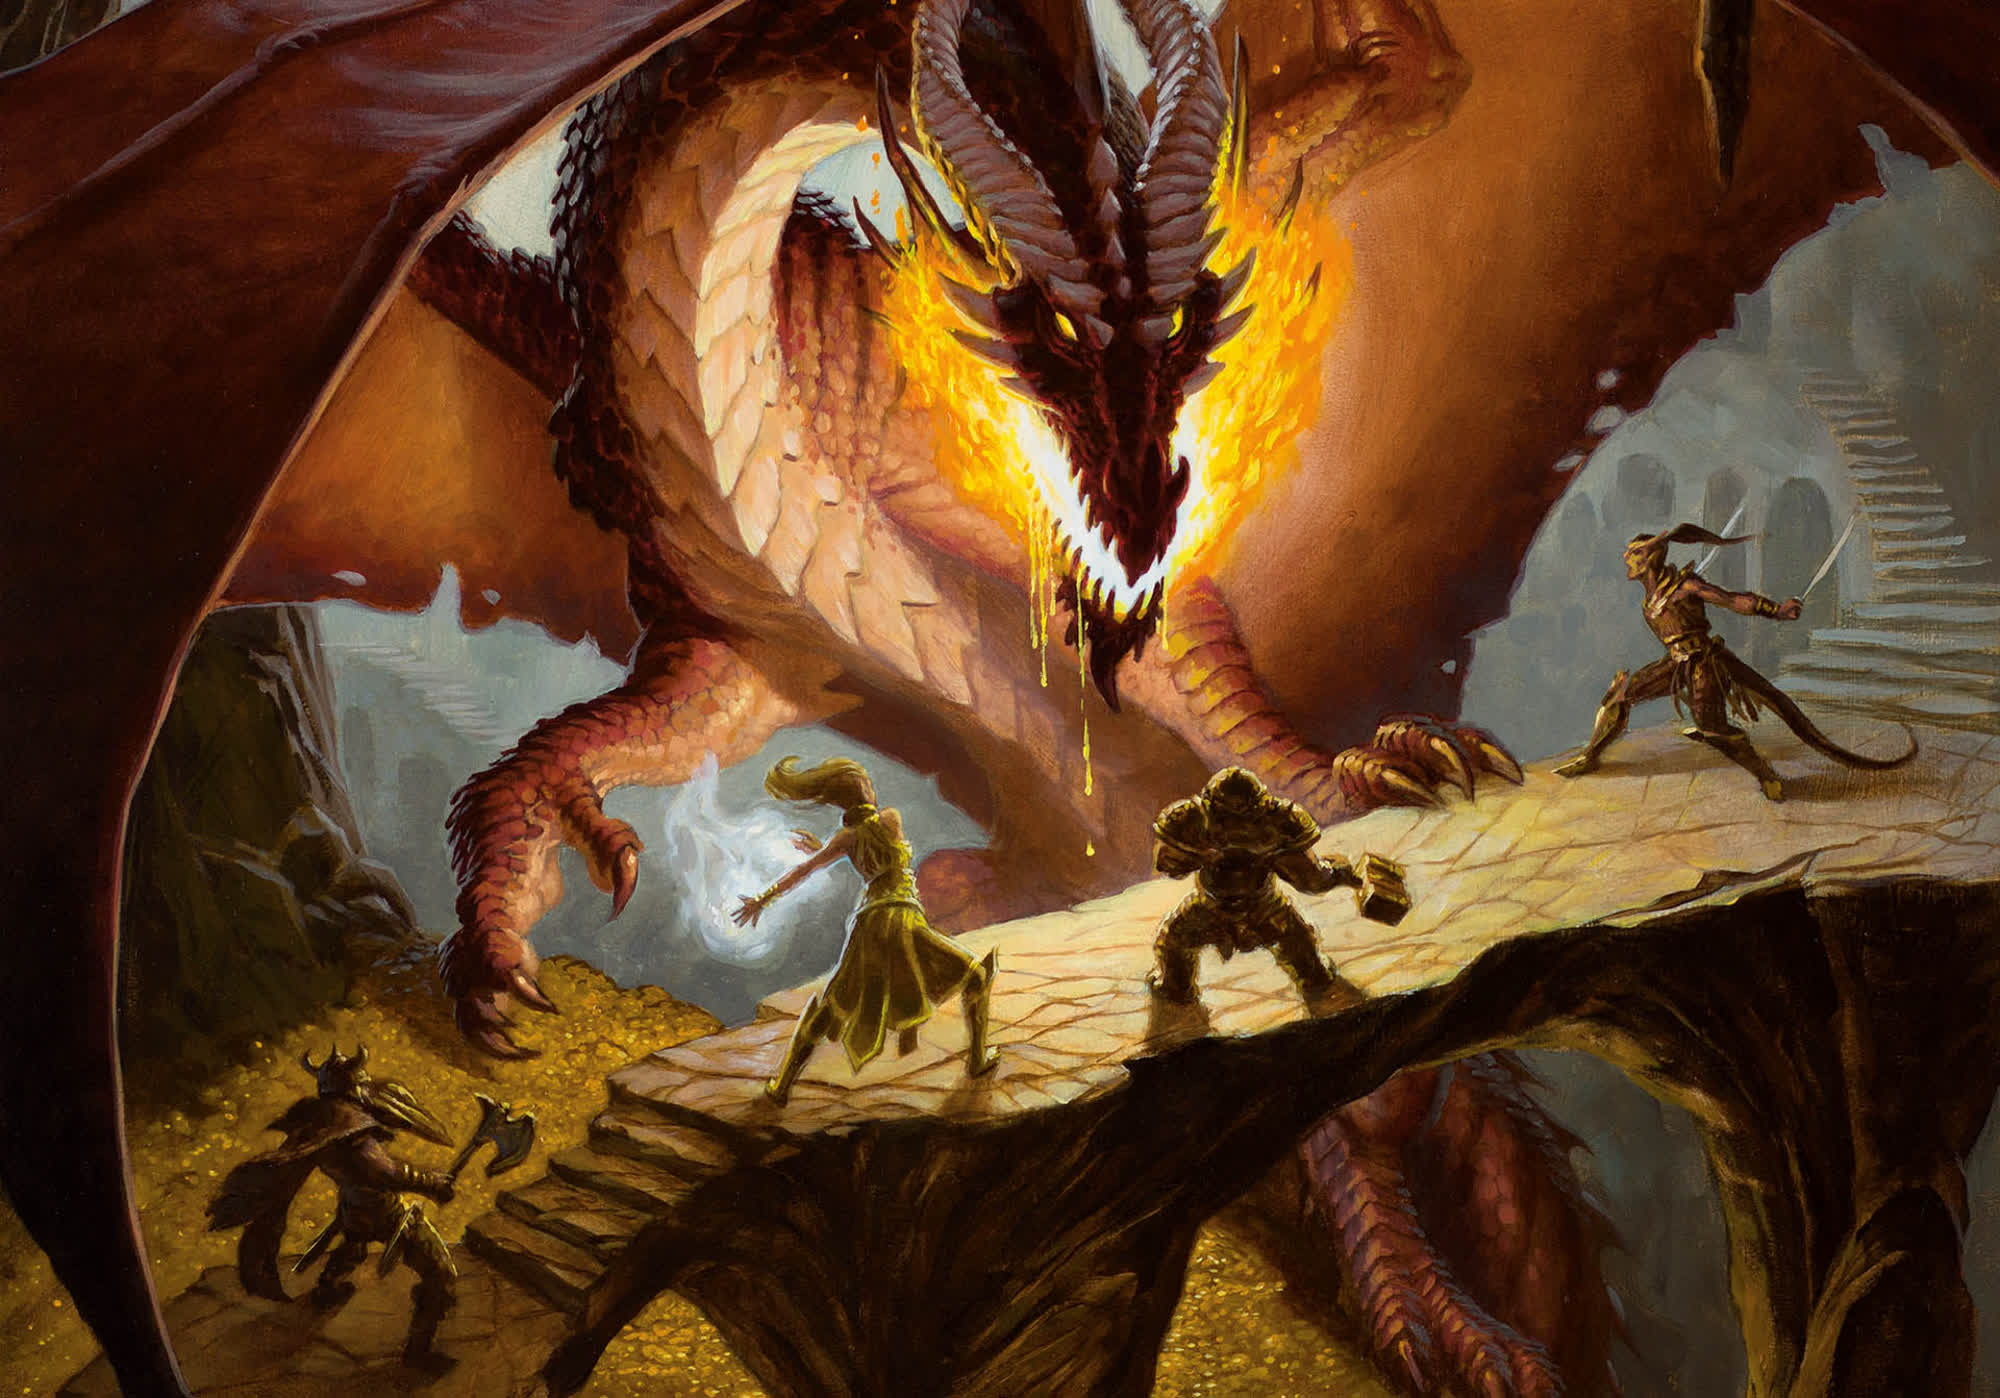 Wizards of the Coast apologize to fans about the new Dungeons & Dragons game license